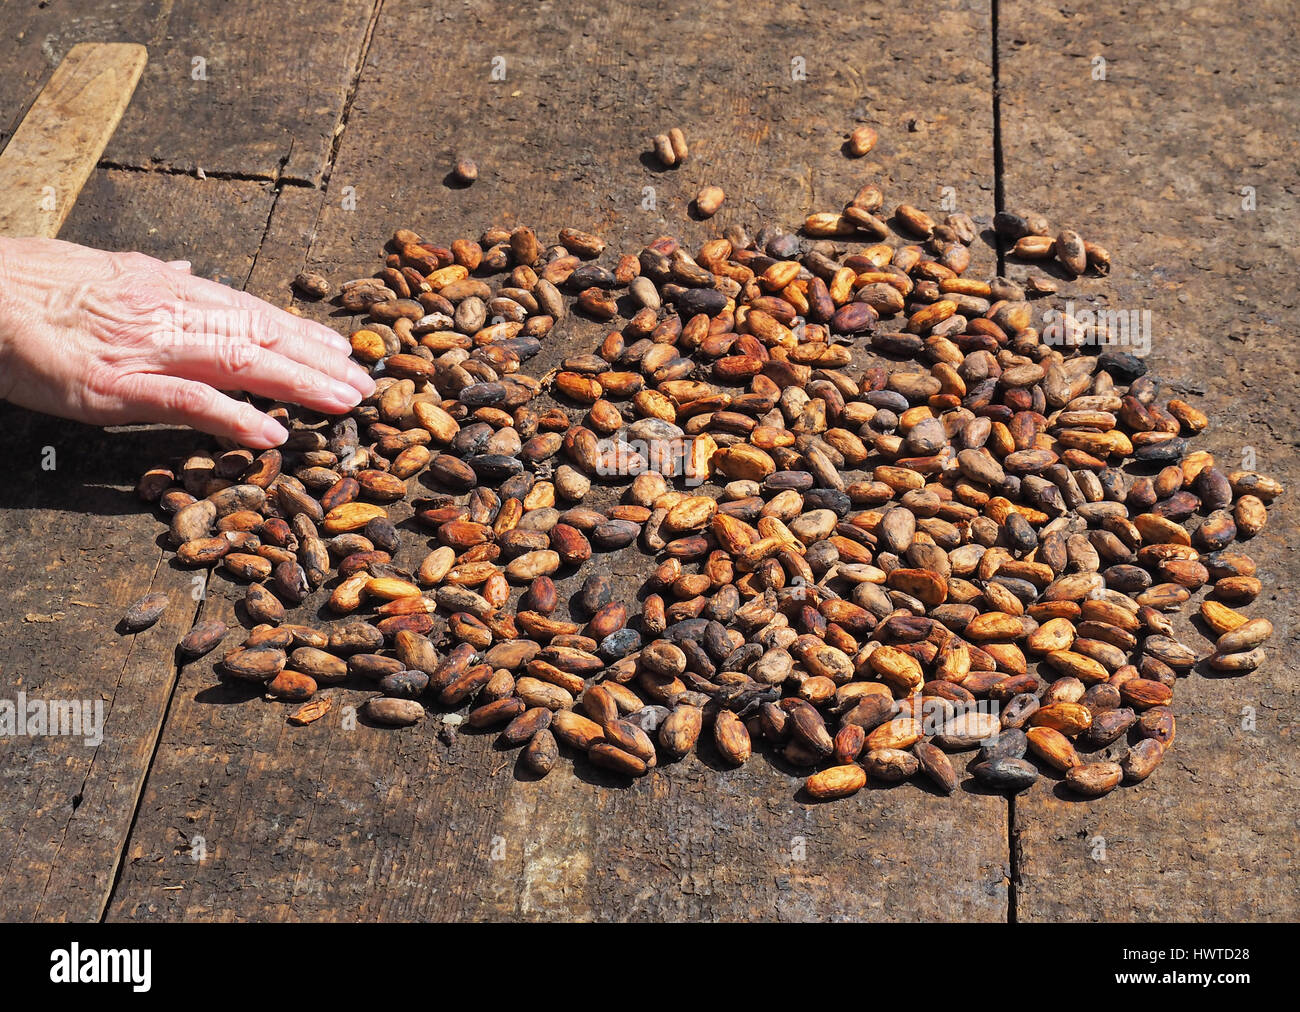 Cacao beans beginning to dry in sun at Women's Chocolate Cooperative, Chocal, near Puerto Plata, Dominican Republic. Stock Photo